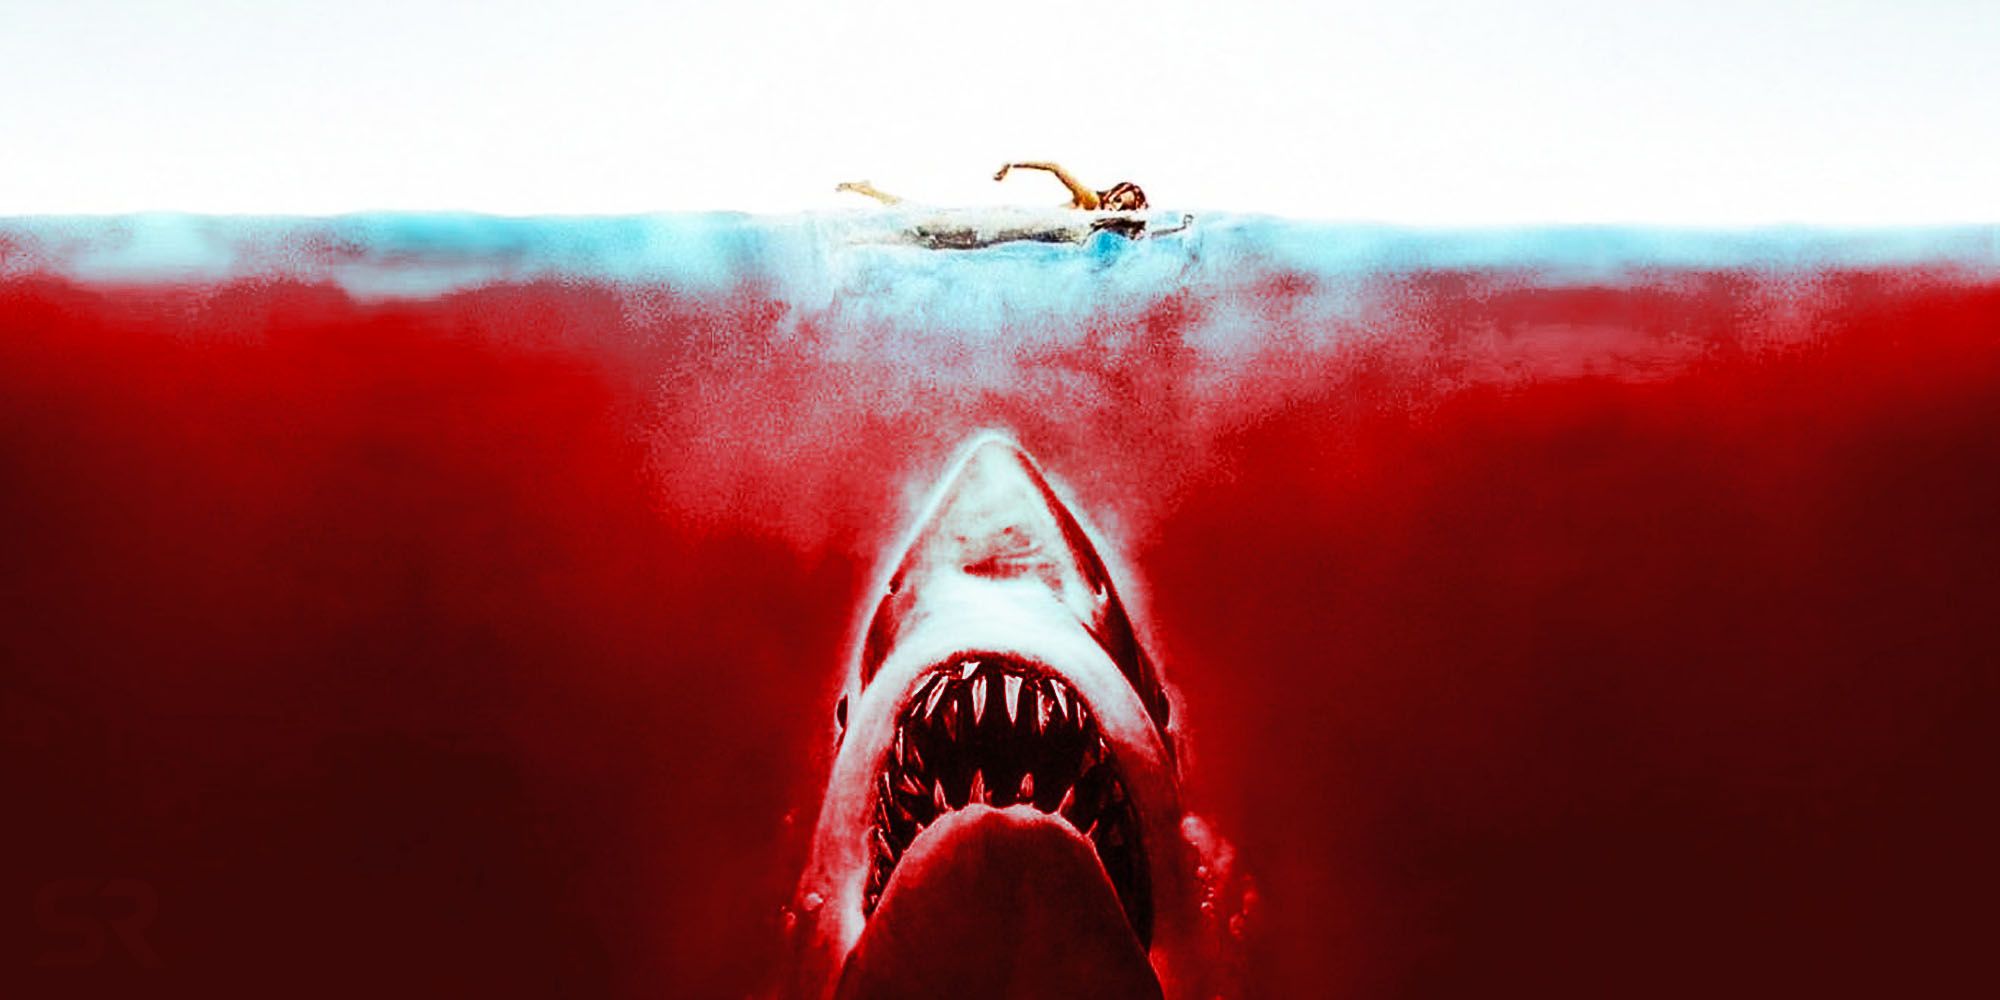 Jaws swims in a sea of blood.